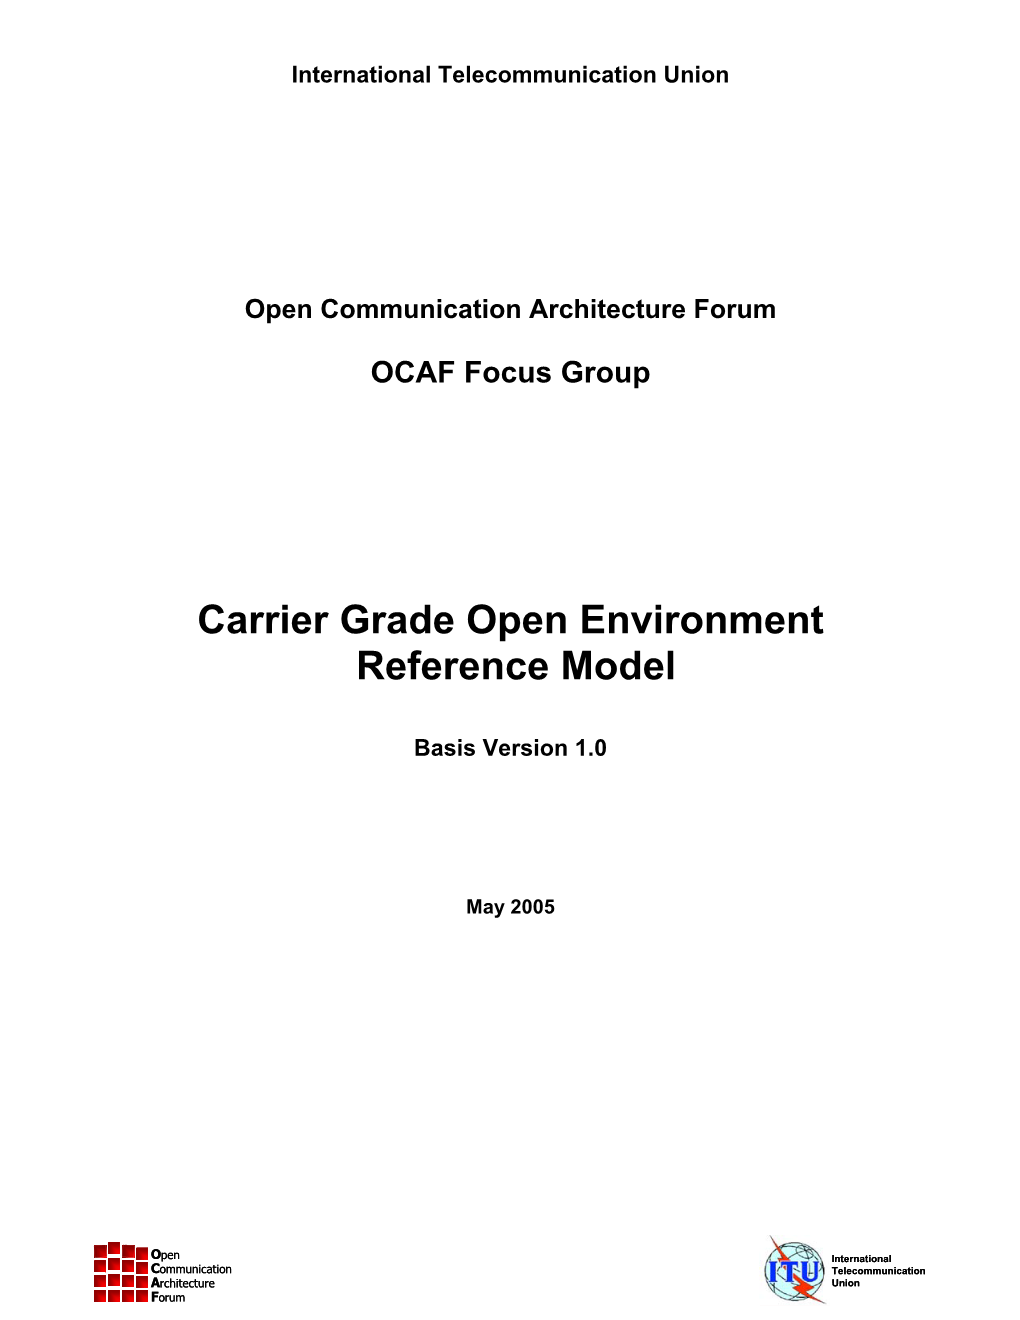 Carrier Grade Open Environment Reference Model